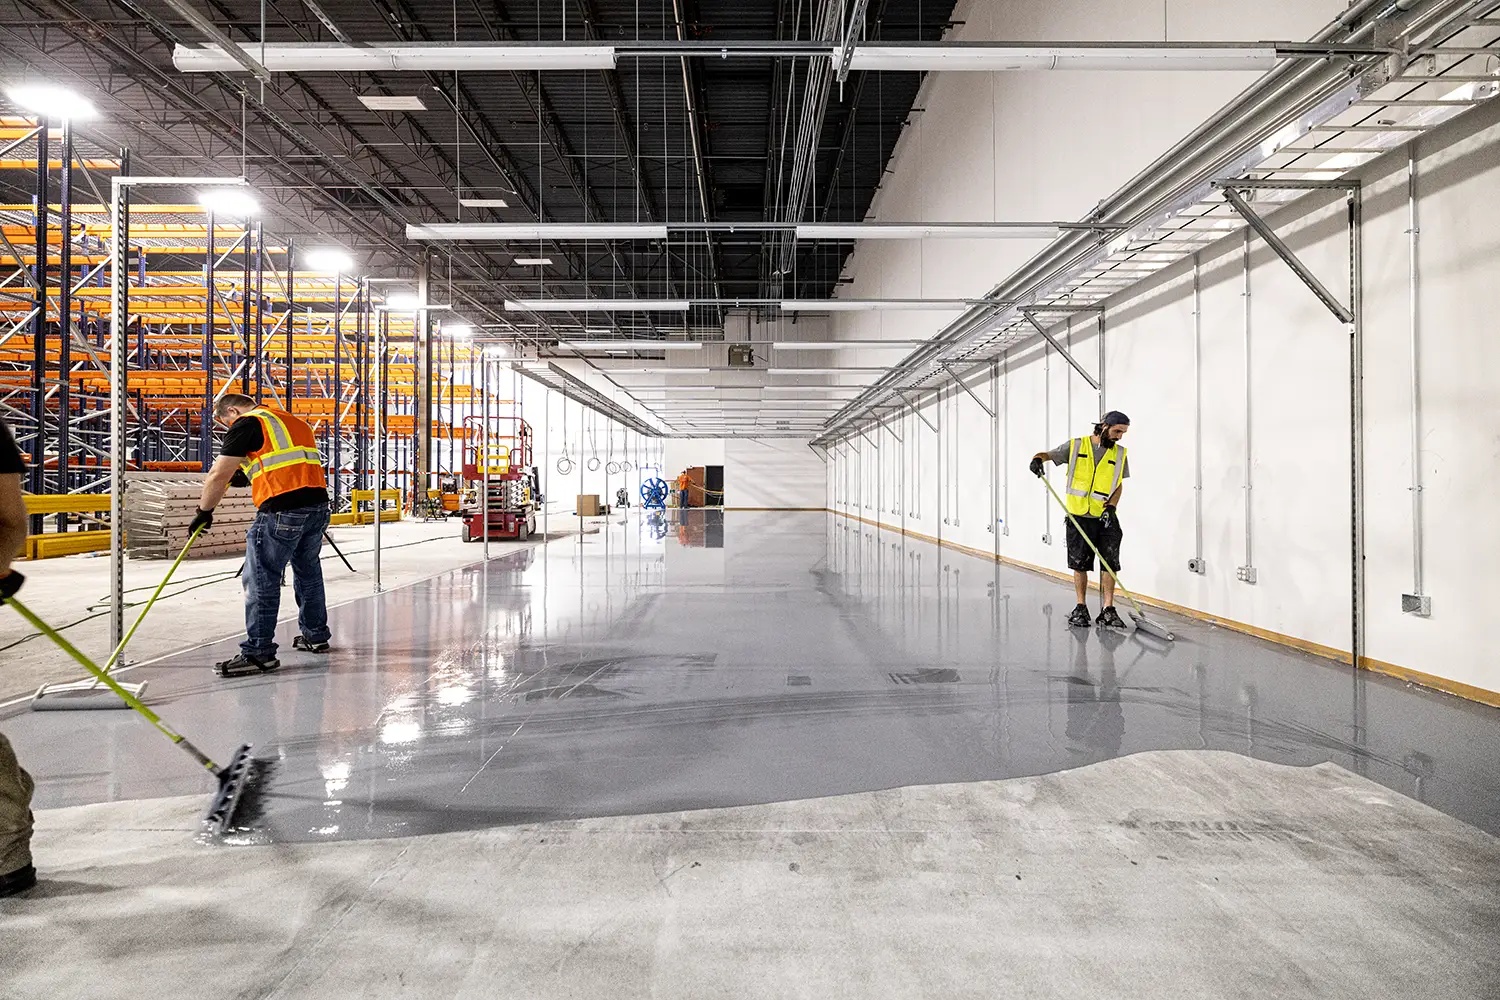 Other commercial flooring considerations